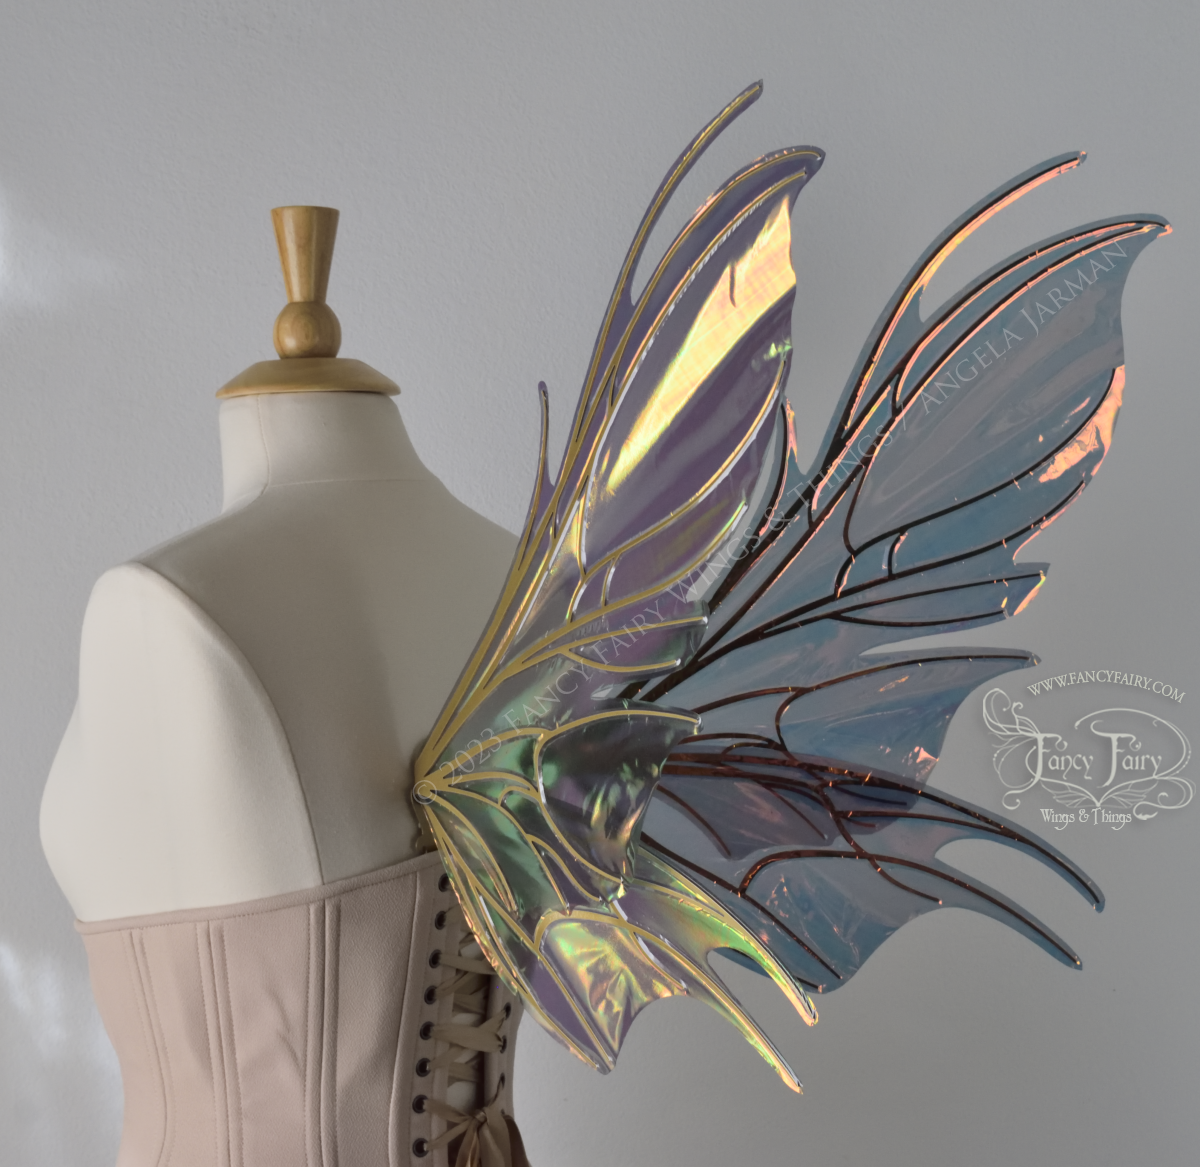 3/4 back view of iridescent orange & dark grey/blue fairy wings with spikey veins, worn by a dress form